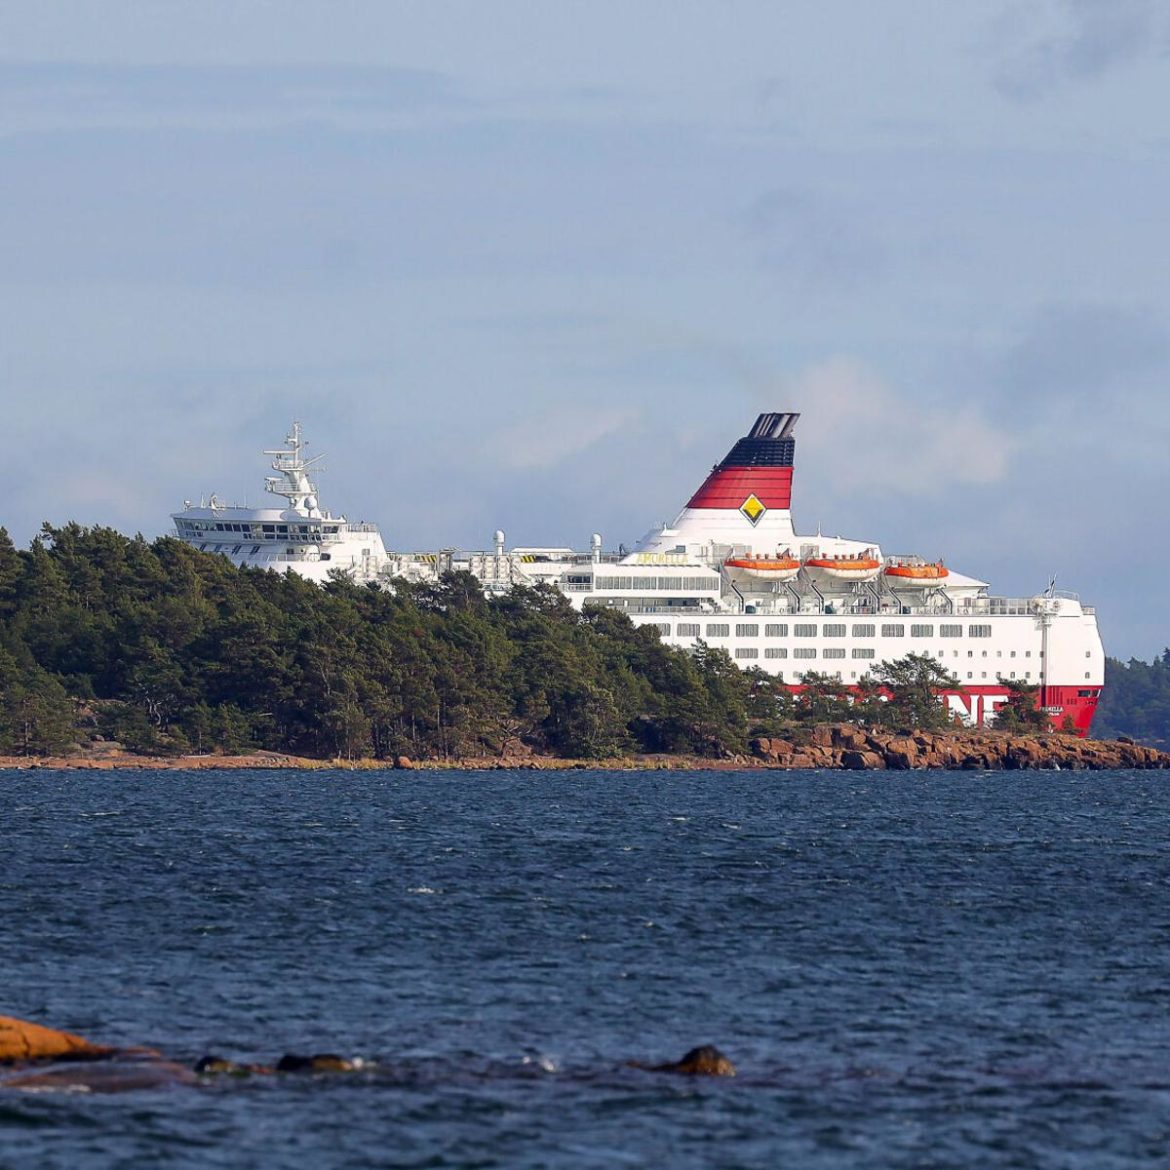 Baltic Sea ferry runs aground in Finnish waters, no injuries